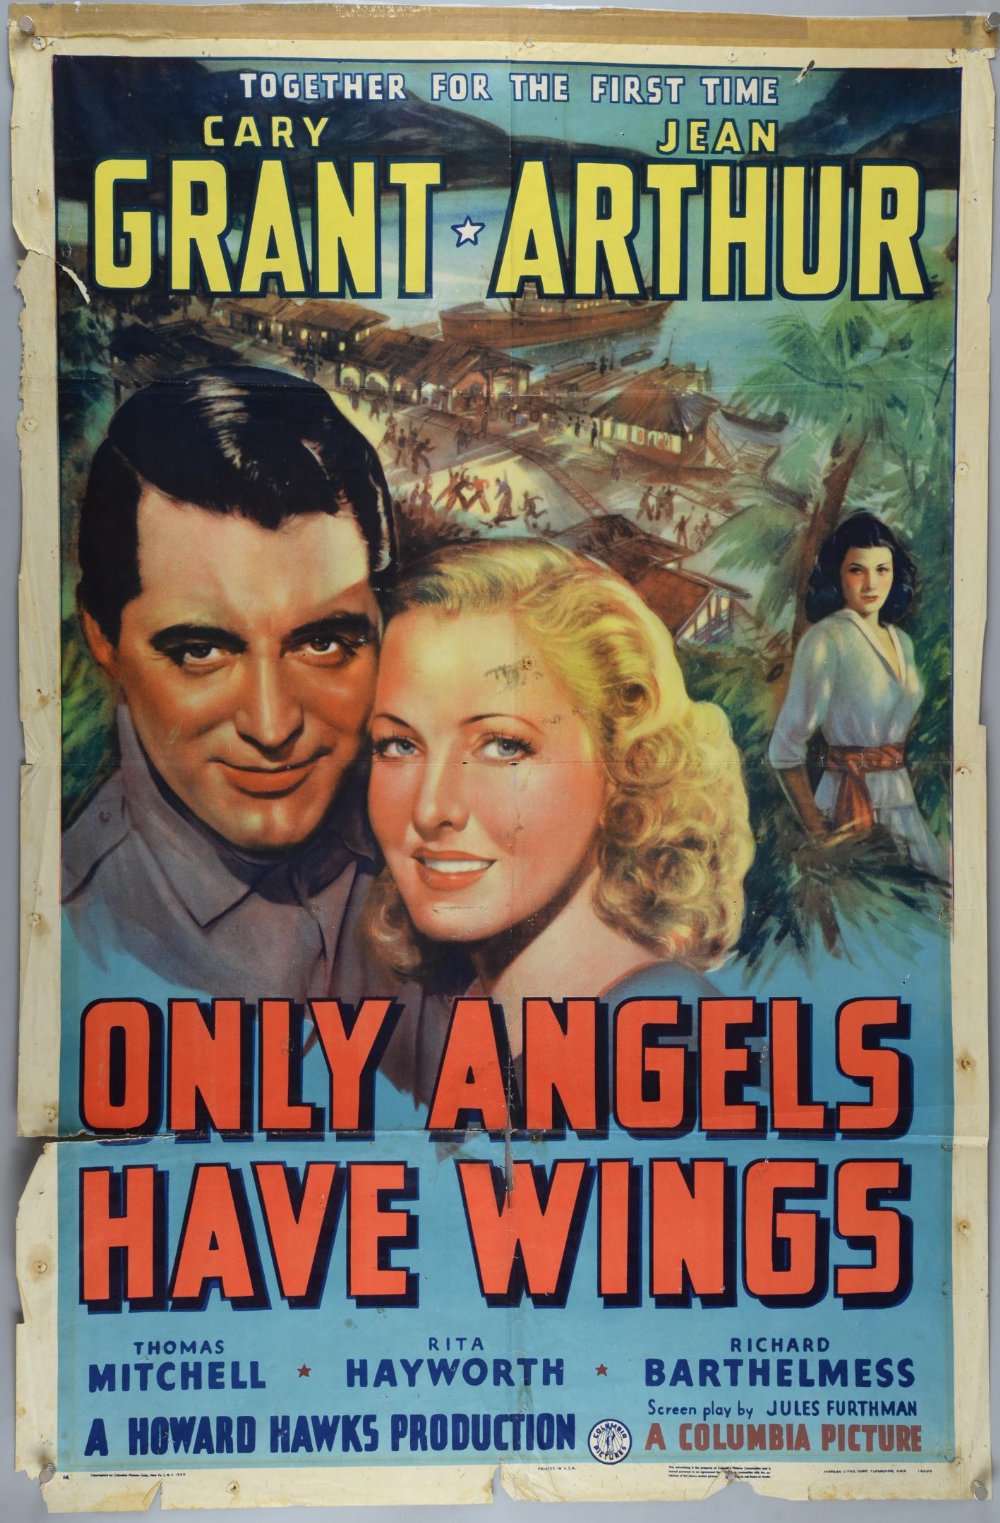 Only Angels Have Wings (1939) US One sheet film poster, starring Cary Grant, Jean Arthur & Rita